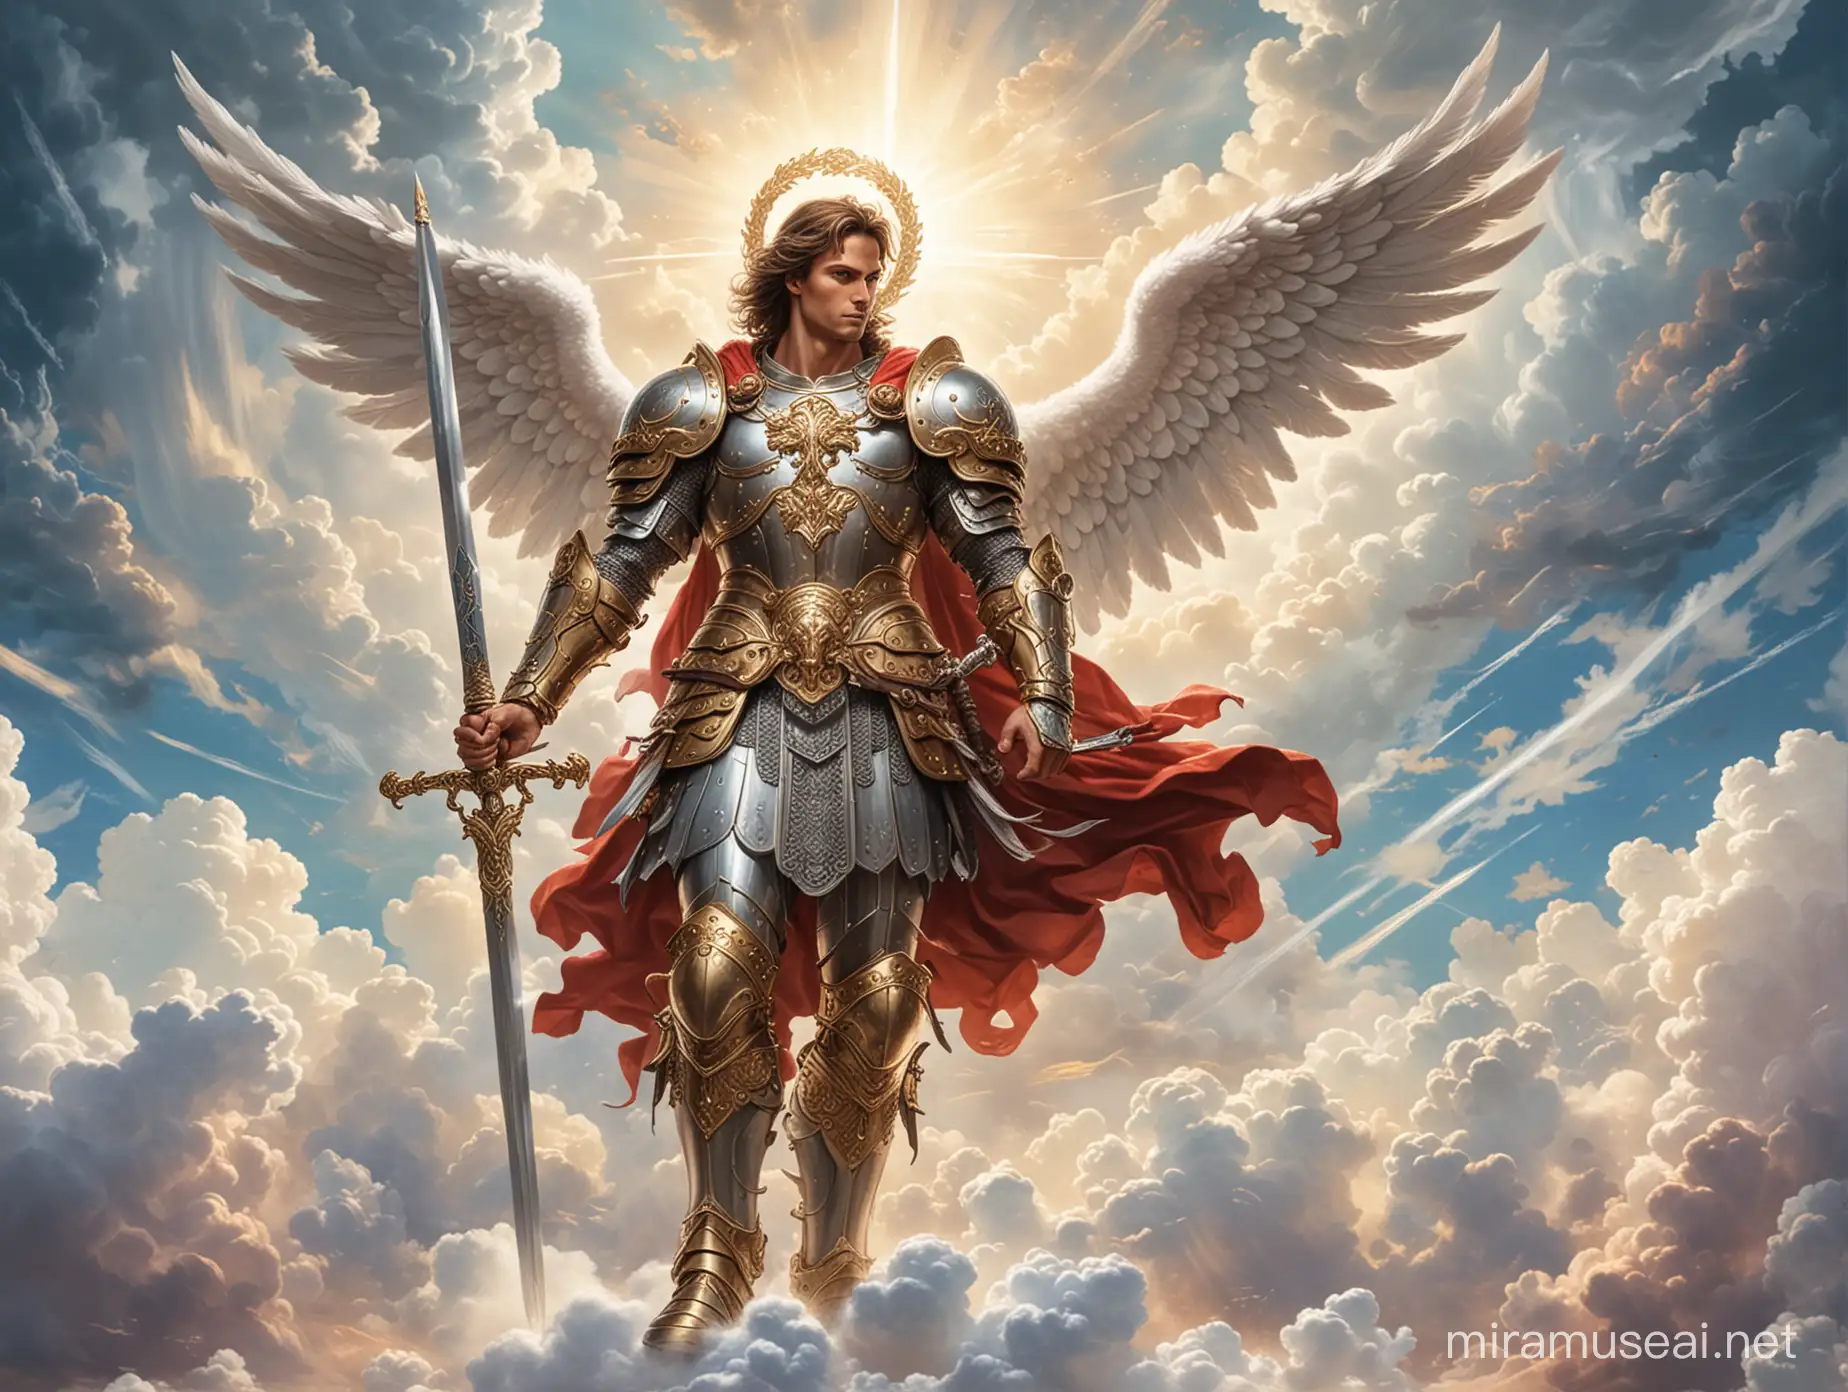 Saint Michael the Archangel in Shining Armor Amidst Fluffy Clouds